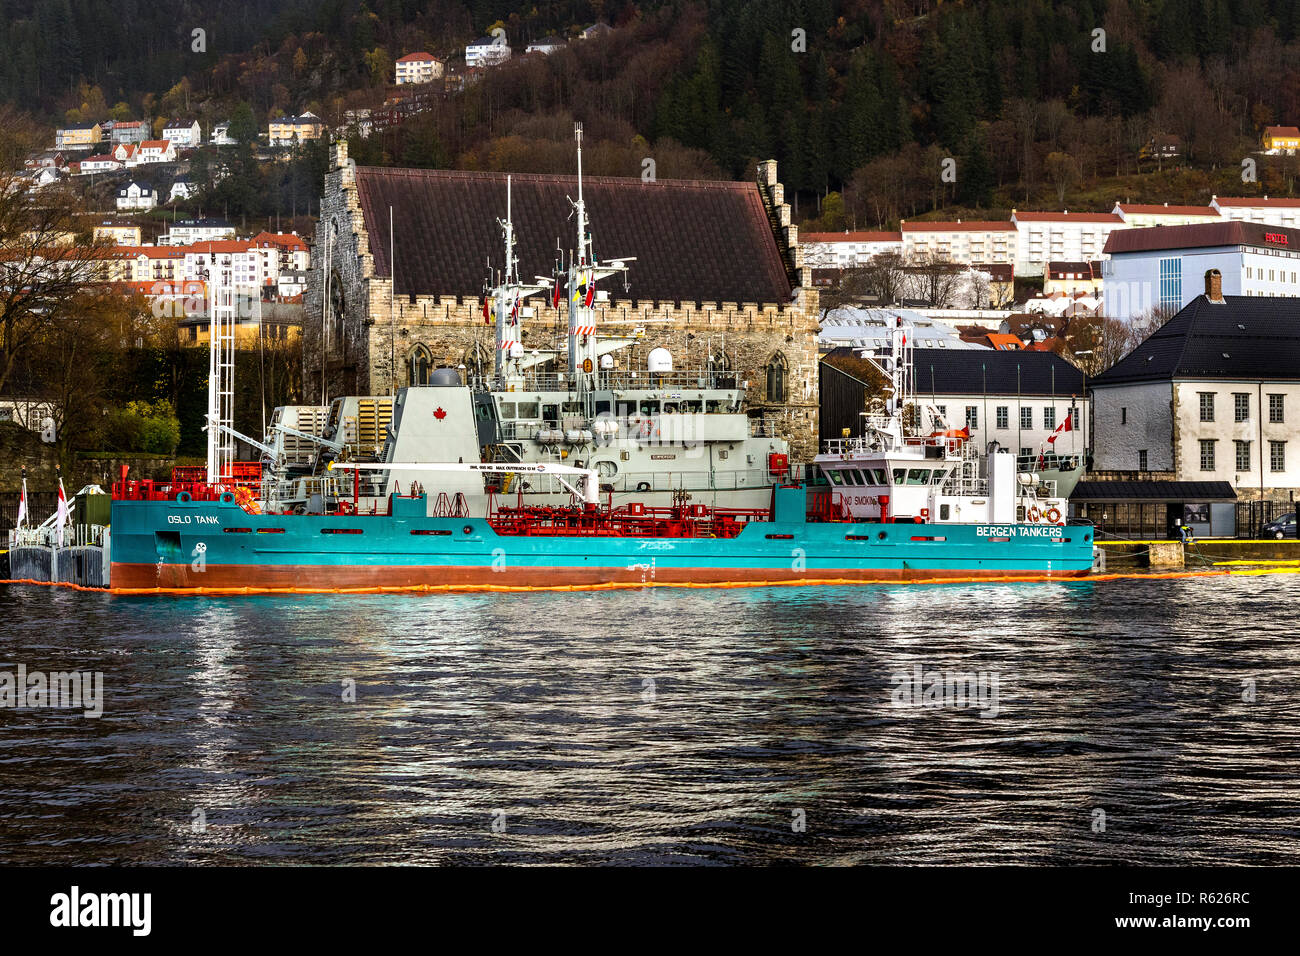 Bunkering vessel Oslo Tank alongside two Canadian navy ships in the port of Bergen, Norway. Haakons Hall and Bergenhus in the background. Stock Photo